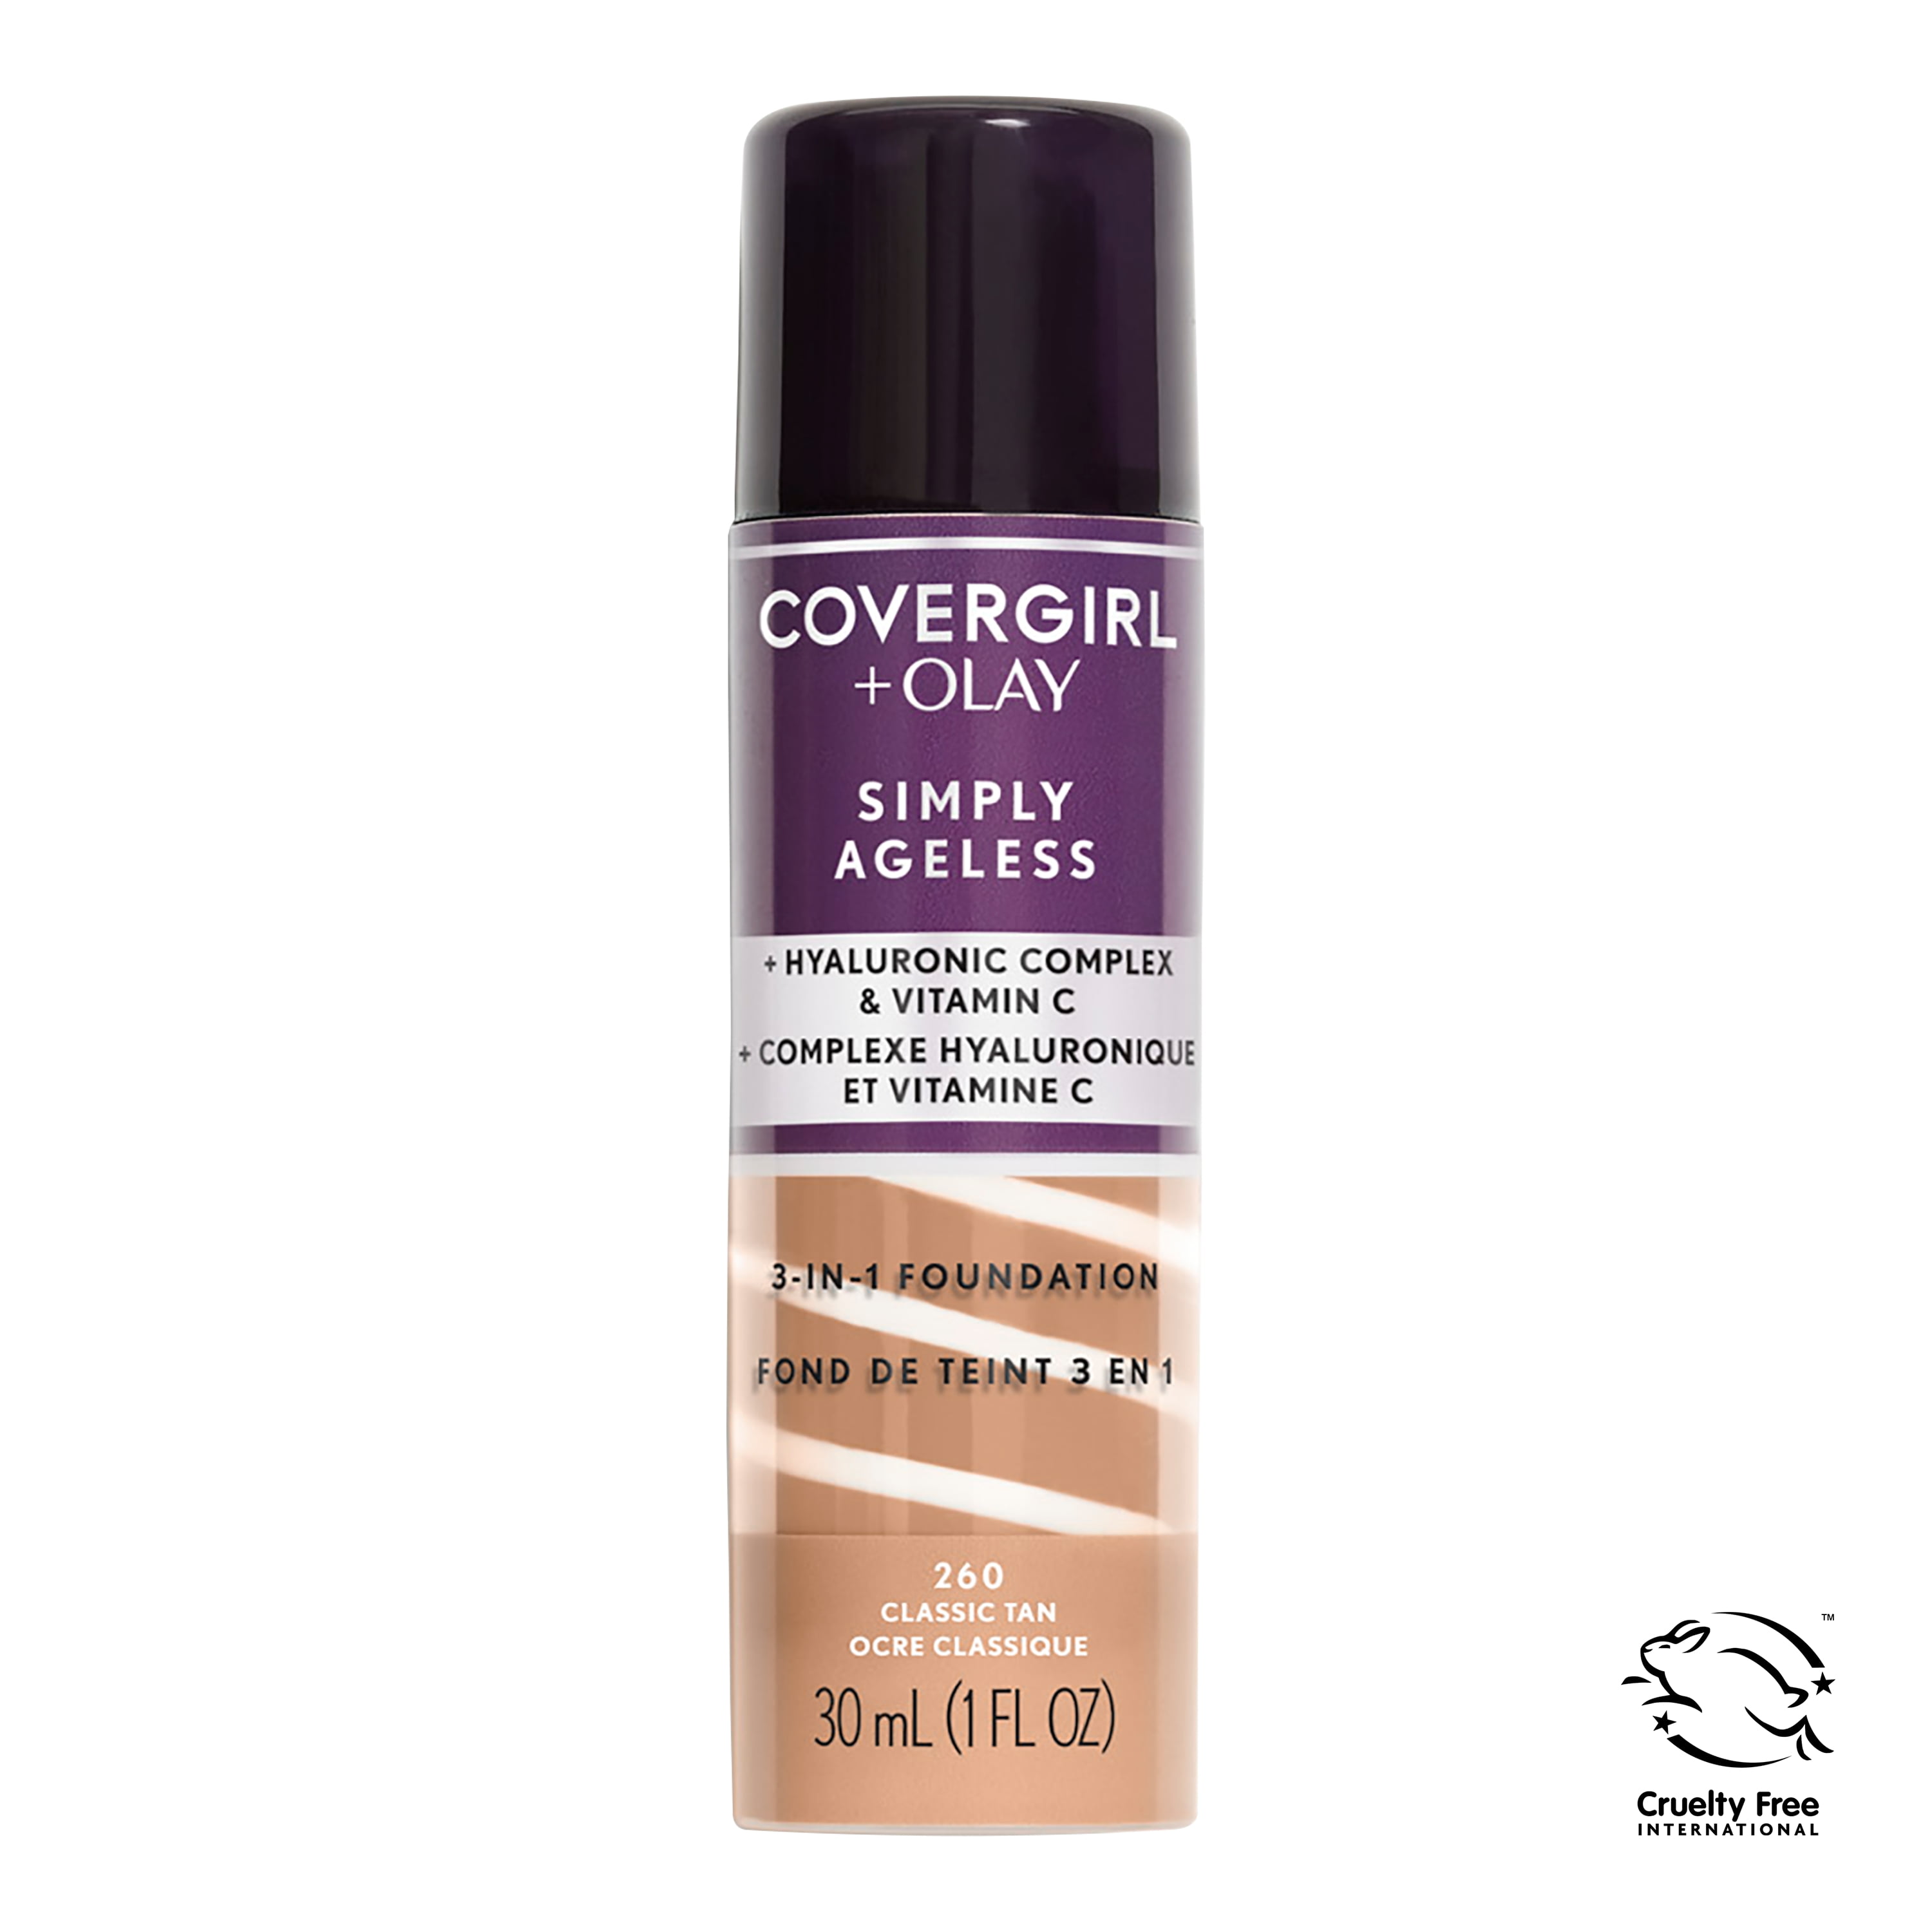 COVERGIRL + OLAY Simply Ageless 3-in-1 Liquid Foundation, 260 Classic Tan, 1 fl oz, Hydrating Foundation, Anti-Aging Foundation, Cruelty Free Foundation, Reduces Wrinkles, Improves Skin Tone